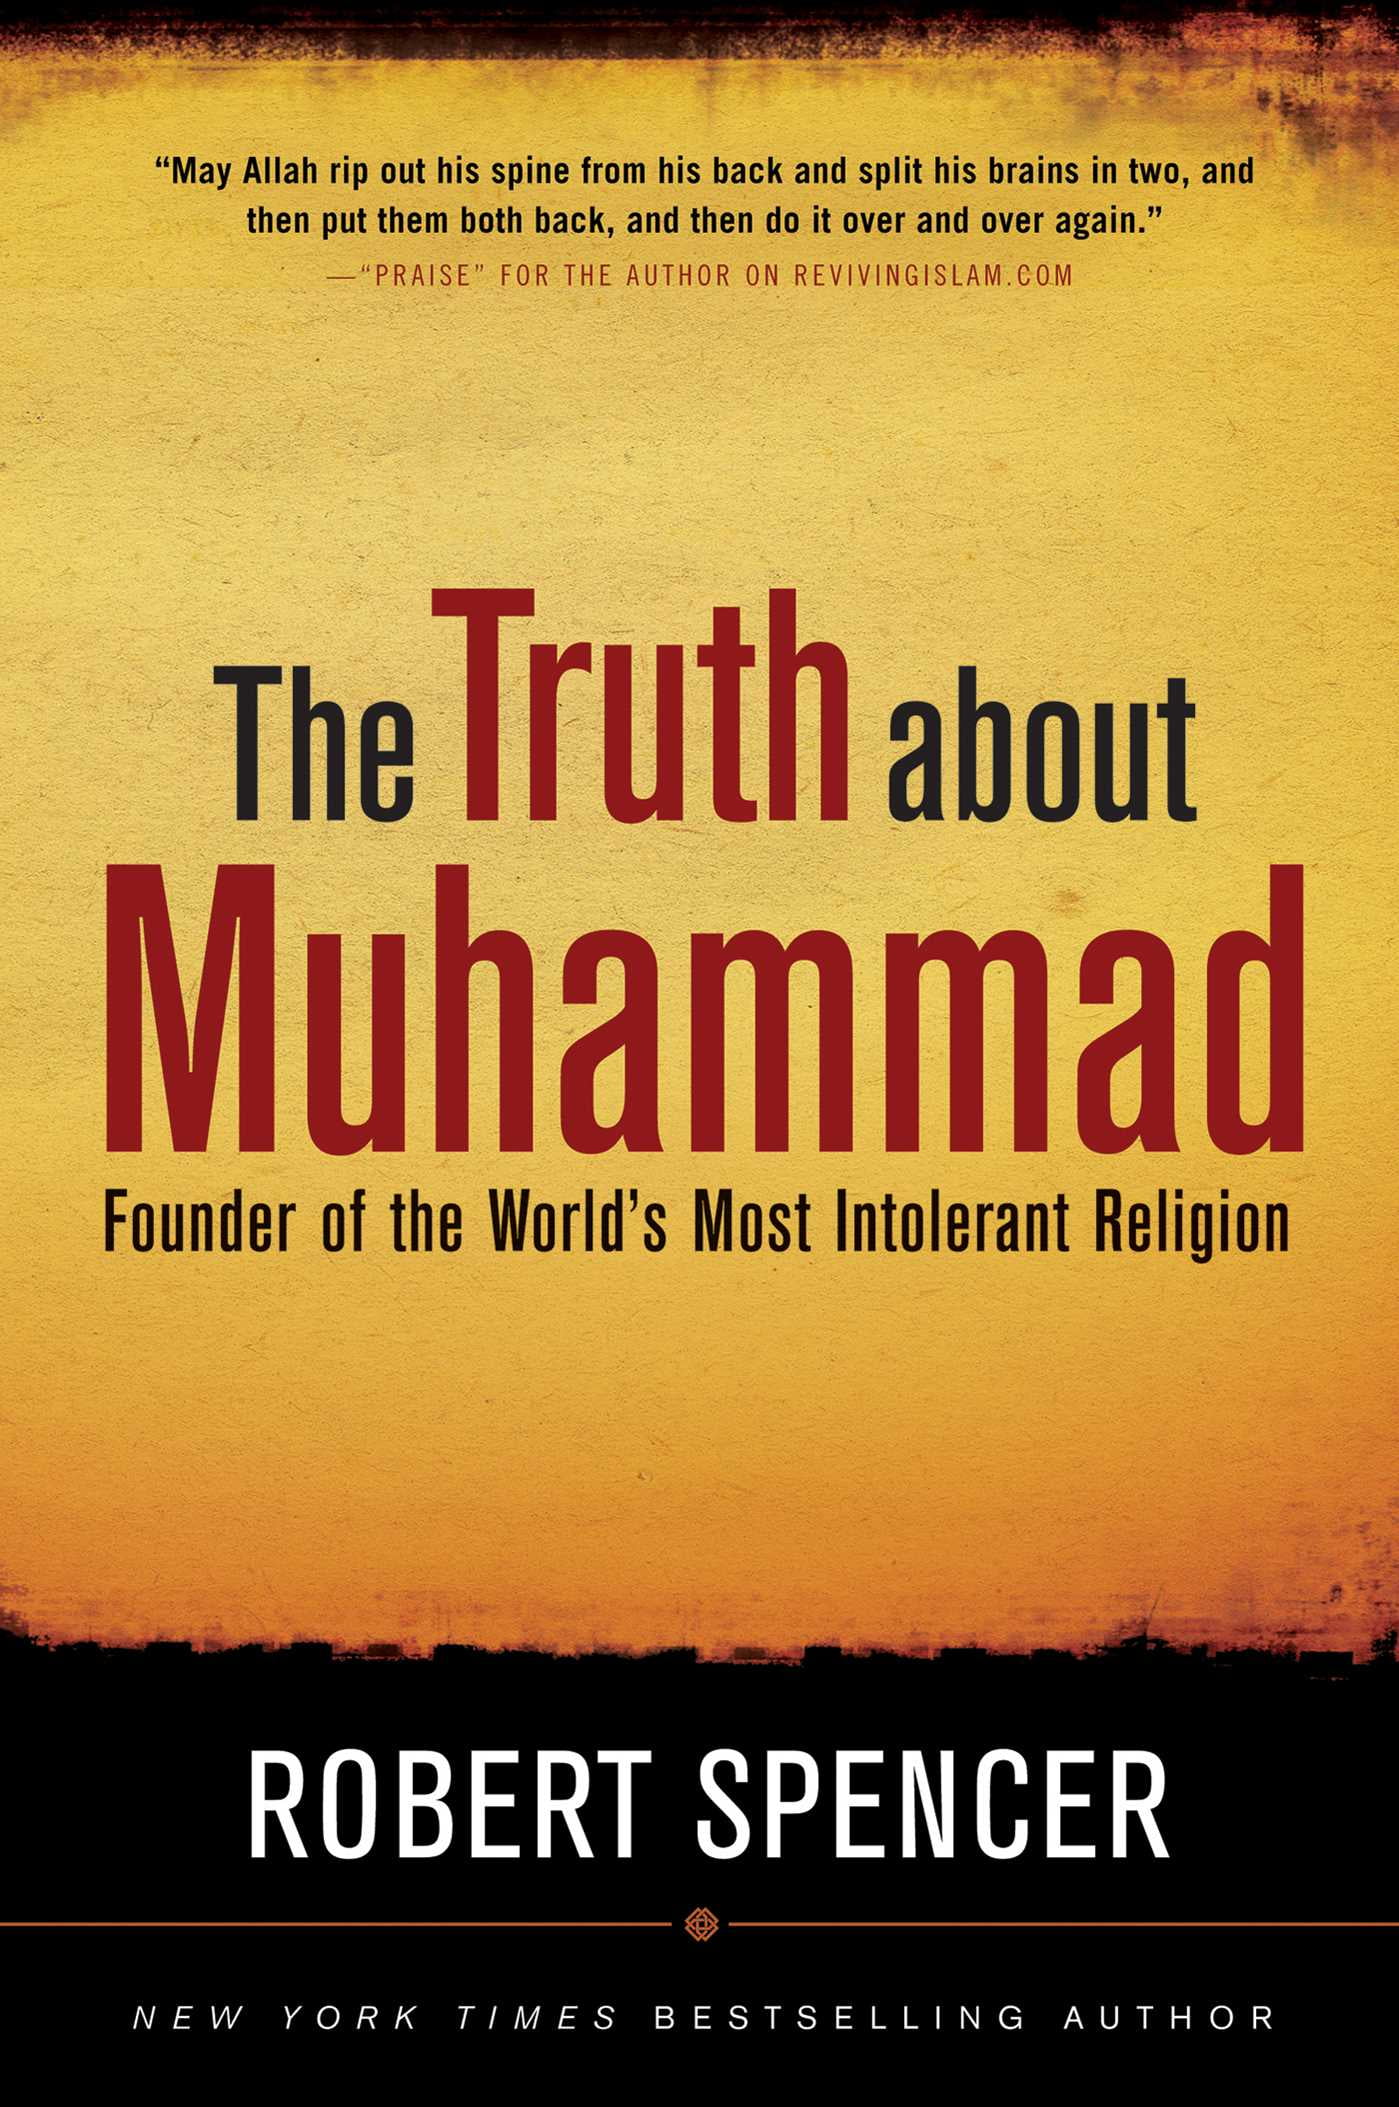 The Truth about Muhammad Founder of the World's Most